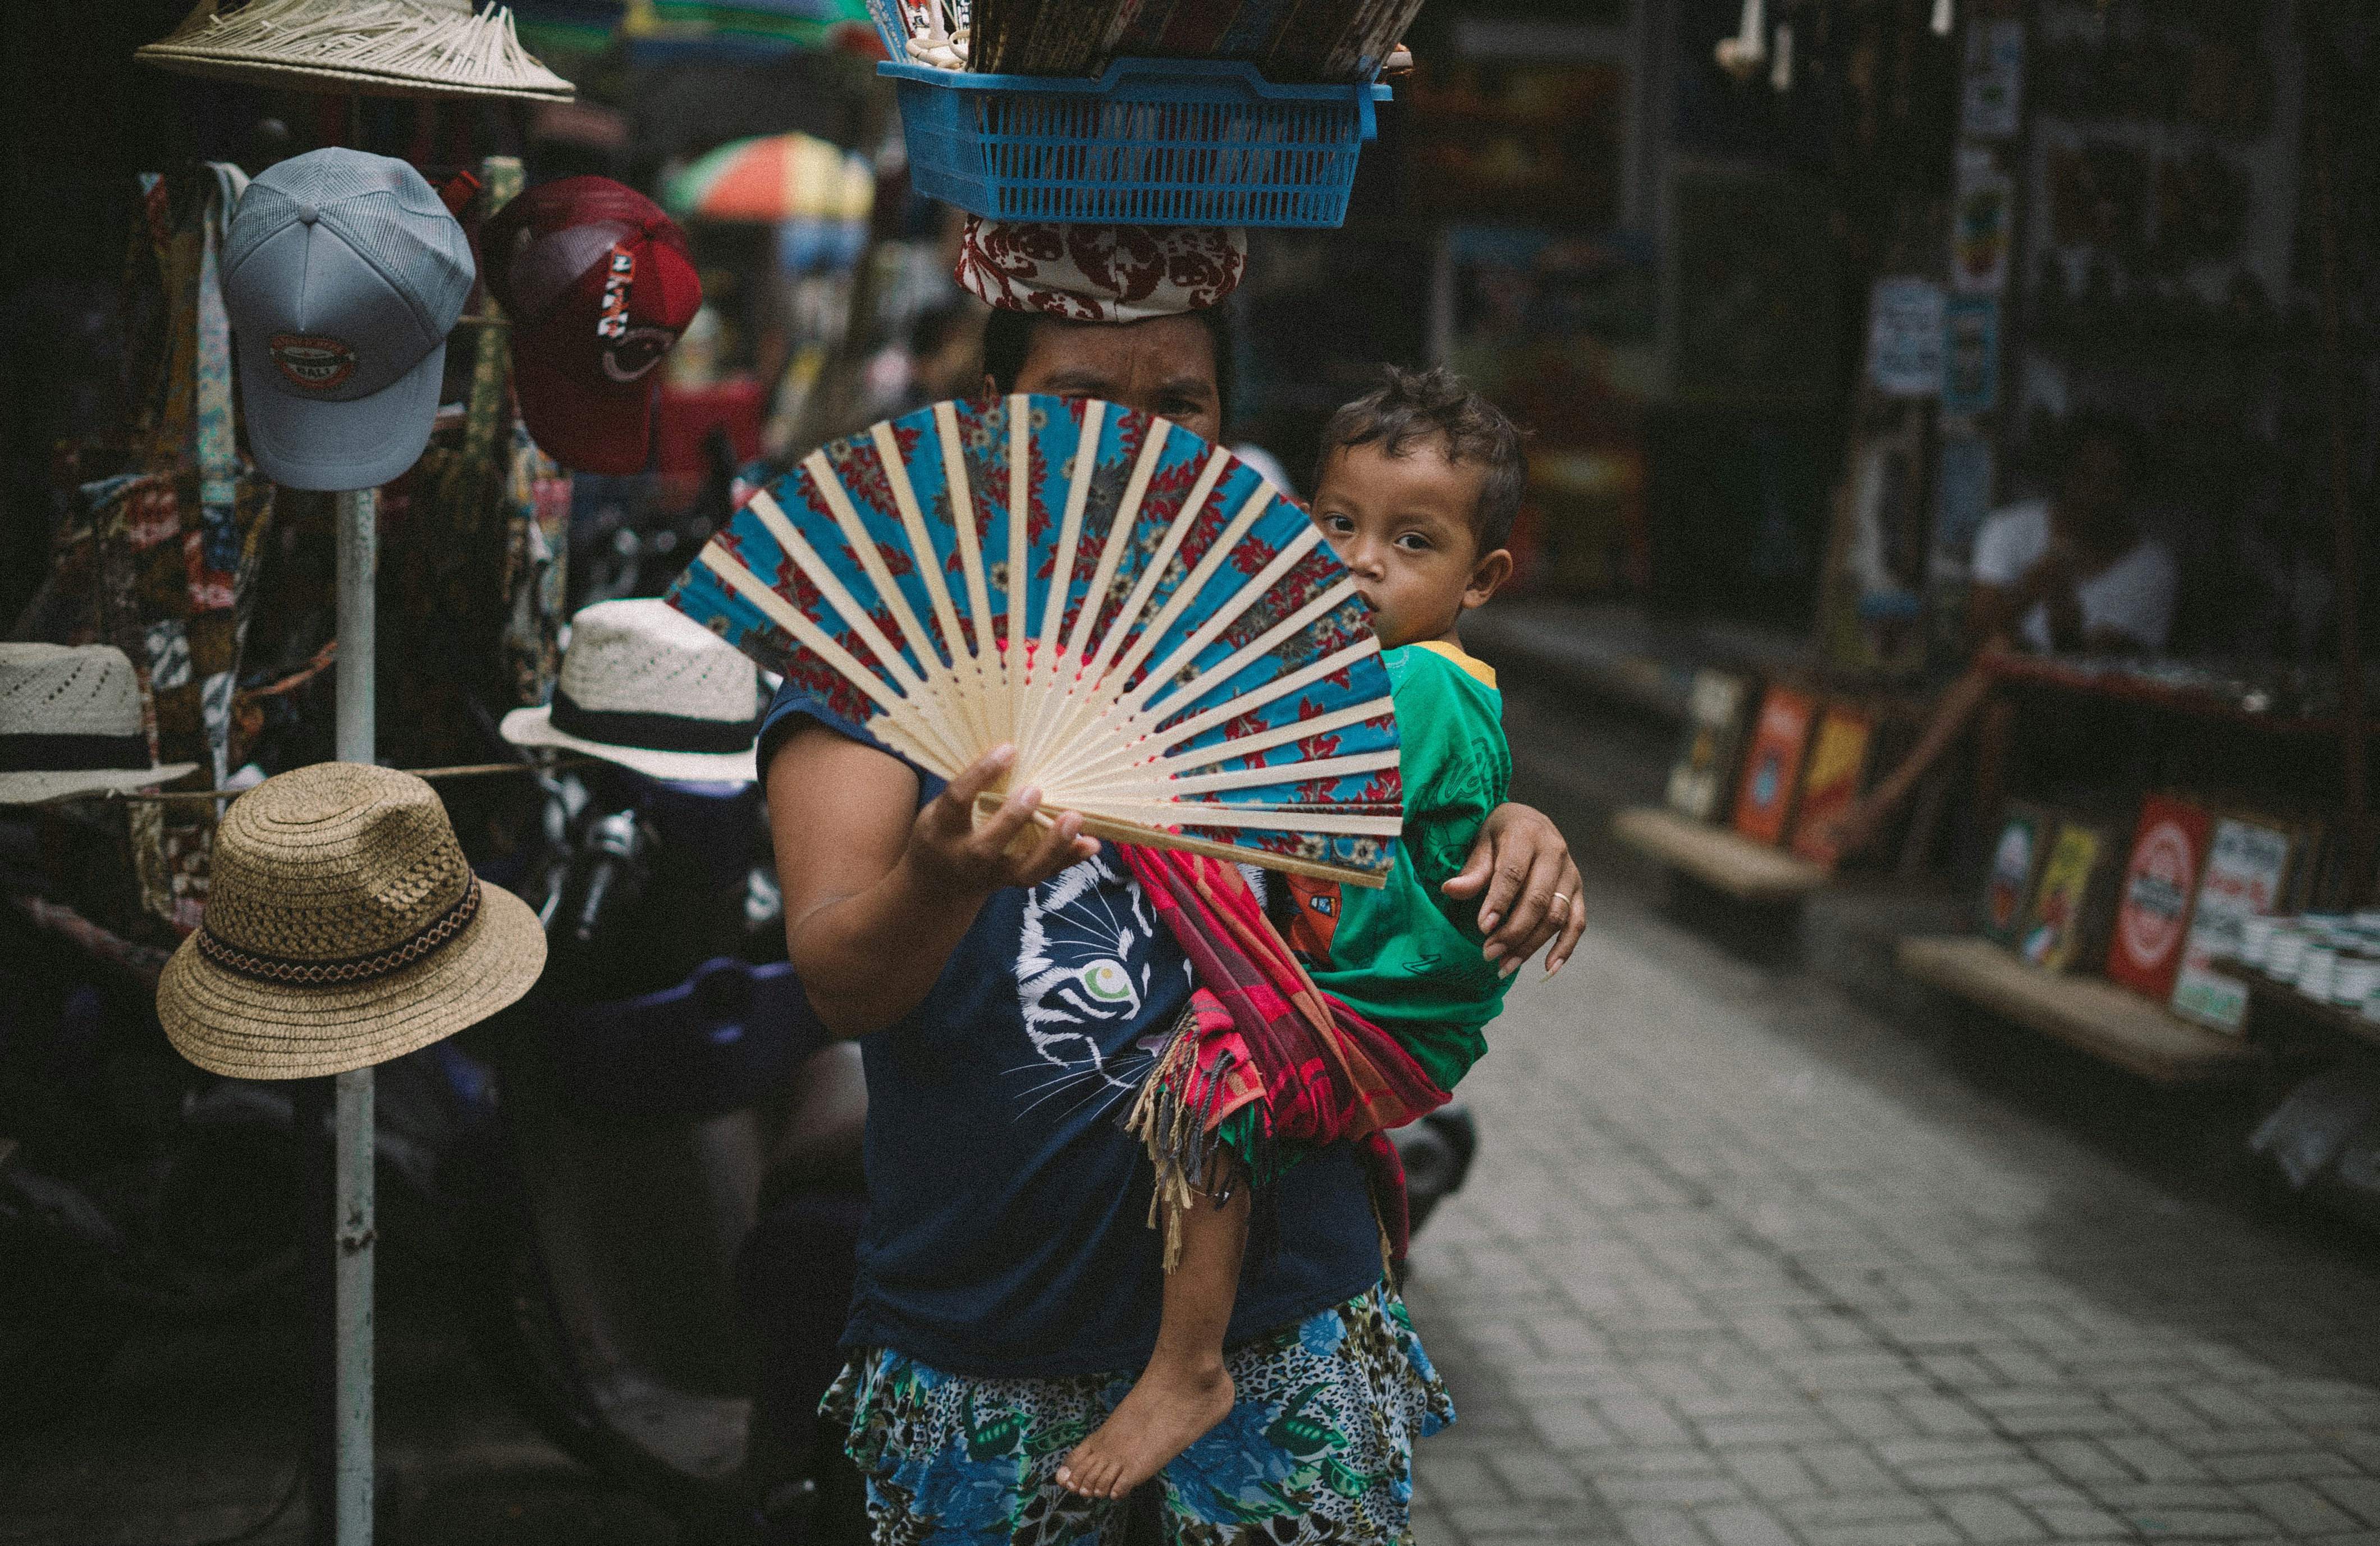 This woman was selling fans in the middle of Ubud market with her kid hanging on her shoulder and a load of other fans on her head